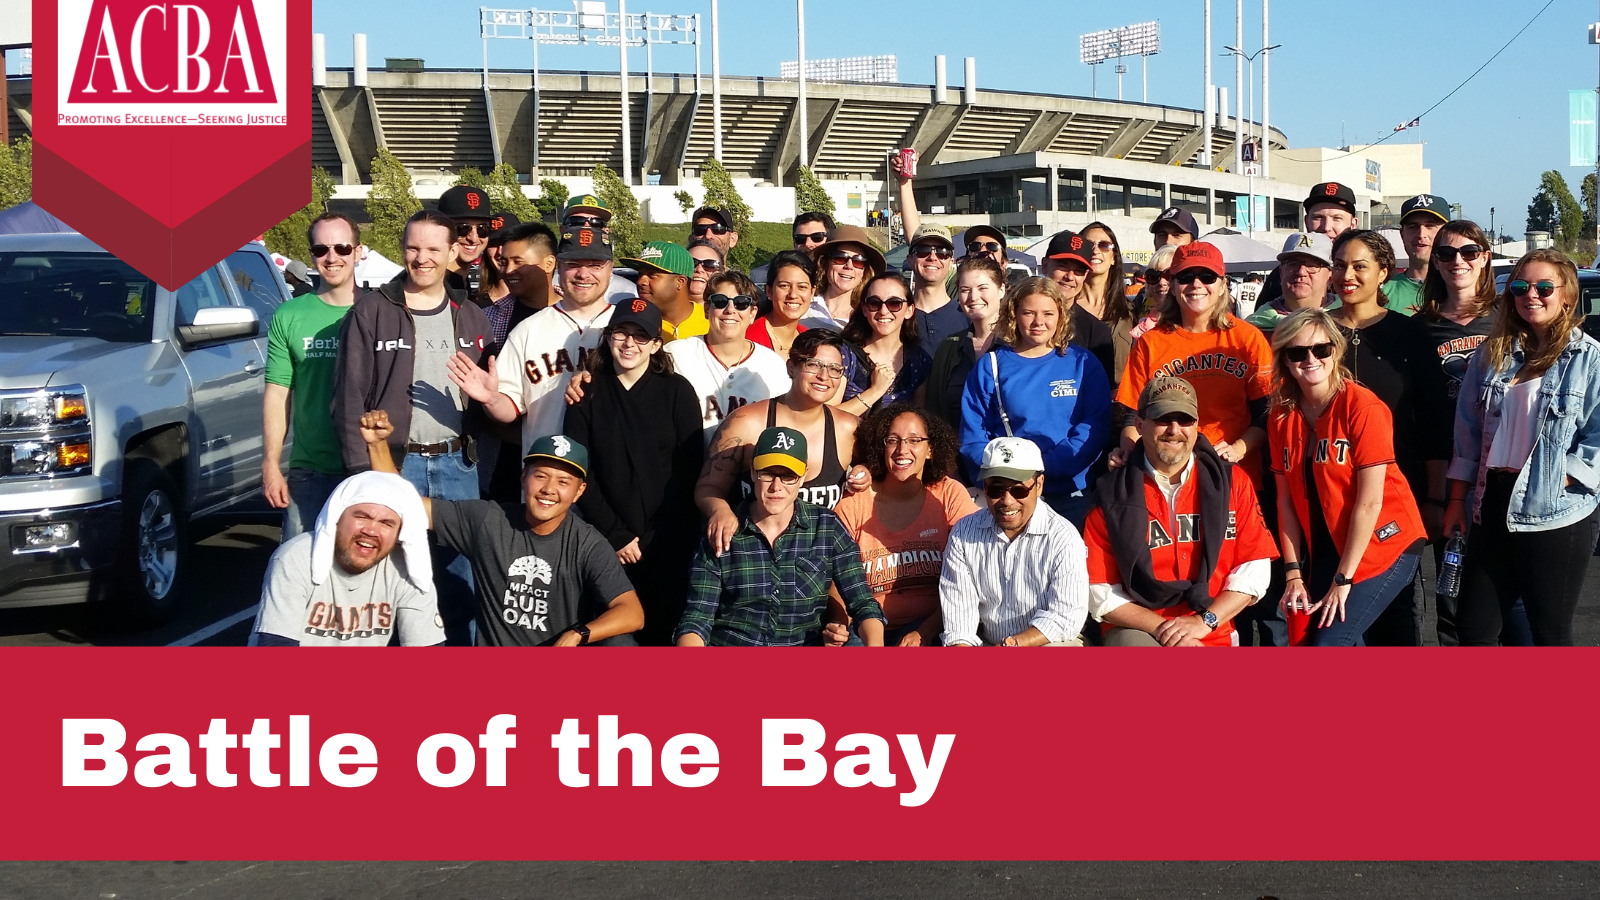 ACBA Night Out - Battle of the Bay Giants vs A's